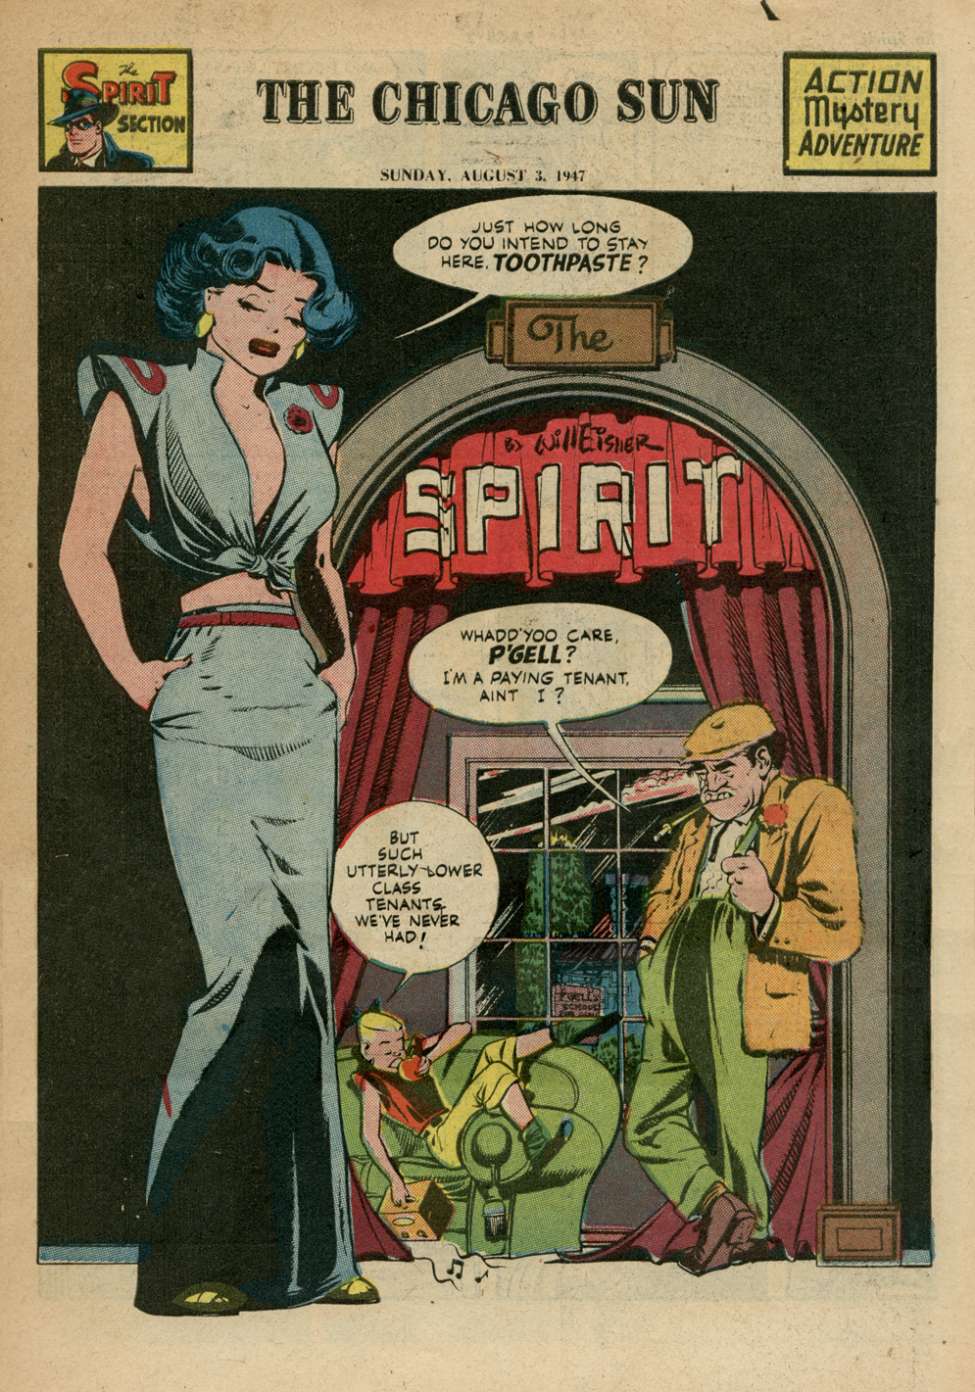 Comic Book Cover For The Spirit (1947-08-03) - Chicago Sun